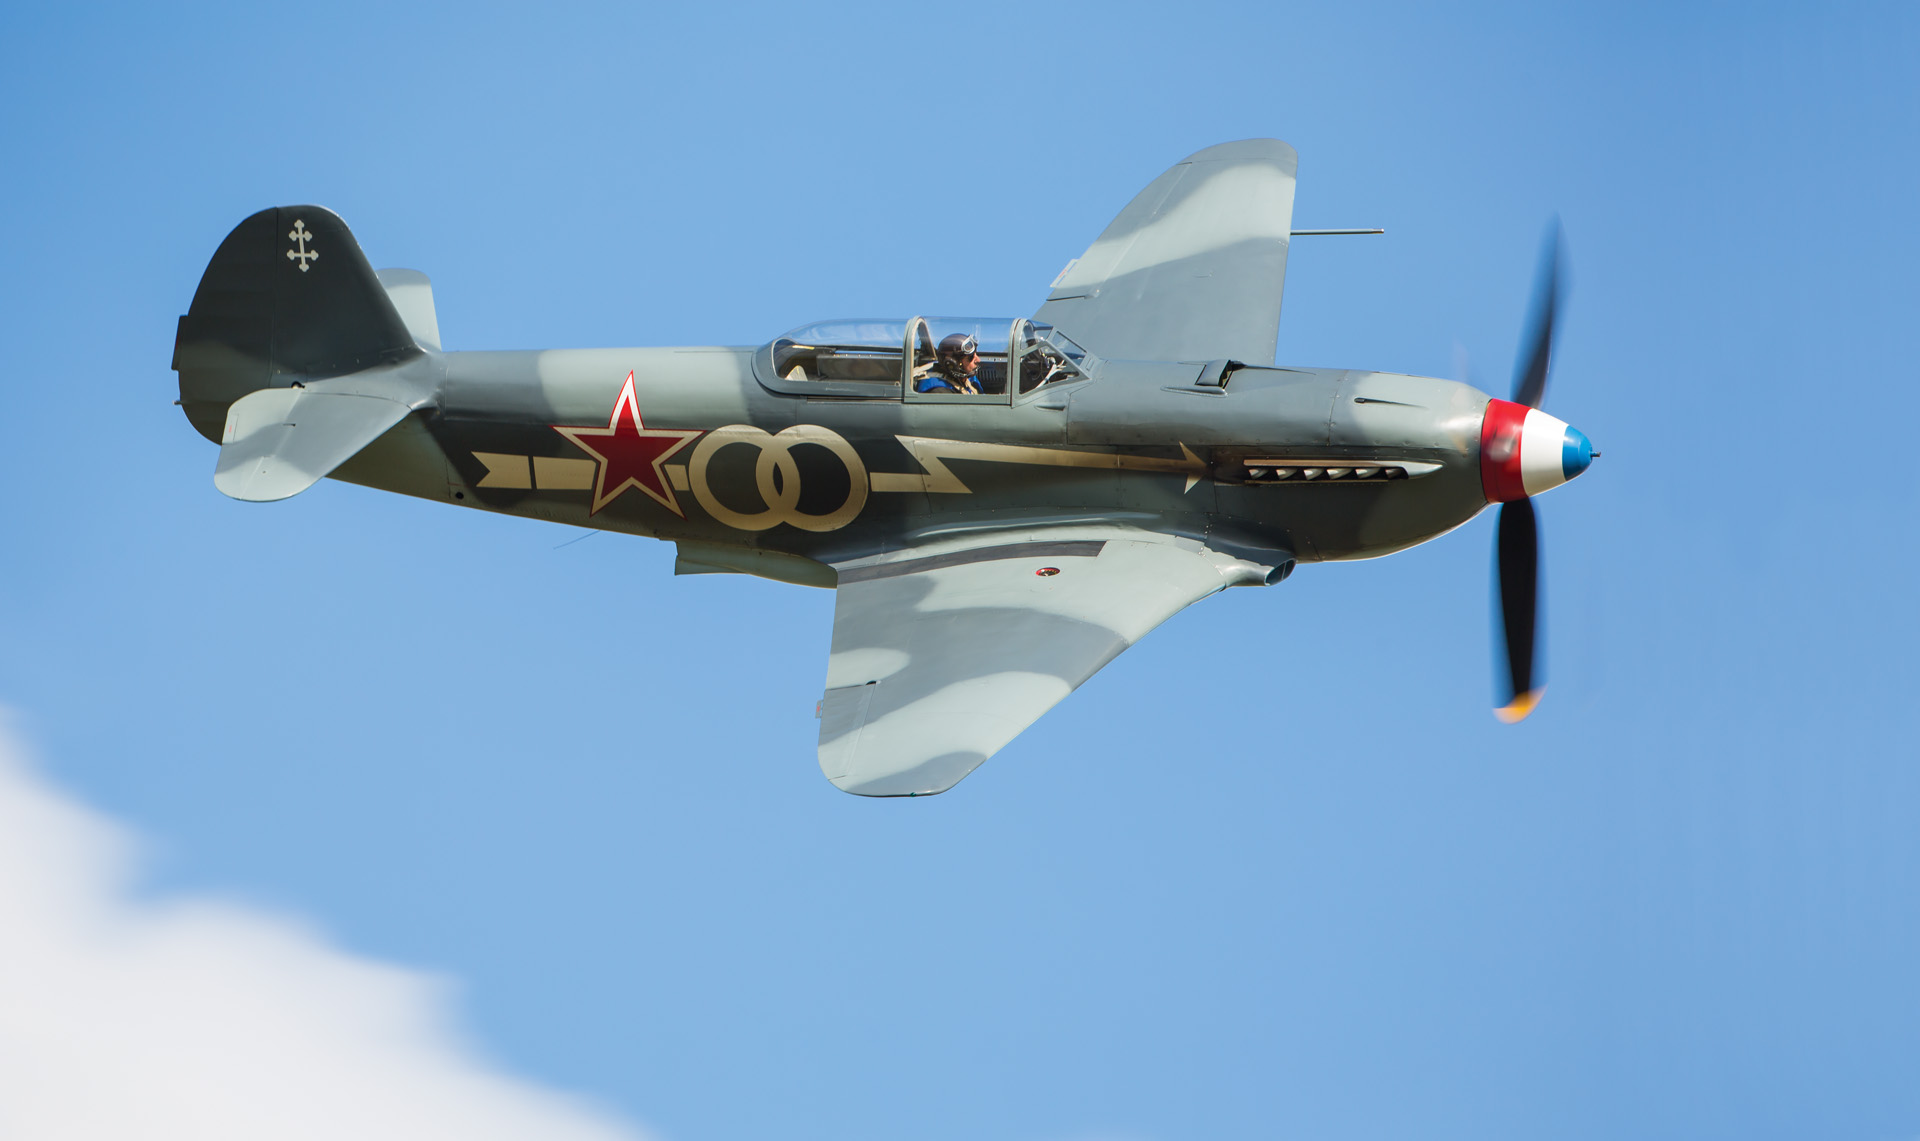 This reproduction Soviet Yakovlev Yak-3 fighter aircraft is painted in the colors of the Normandie Niemen and is an accurate representation of the type piloted by Roger Sauvage.